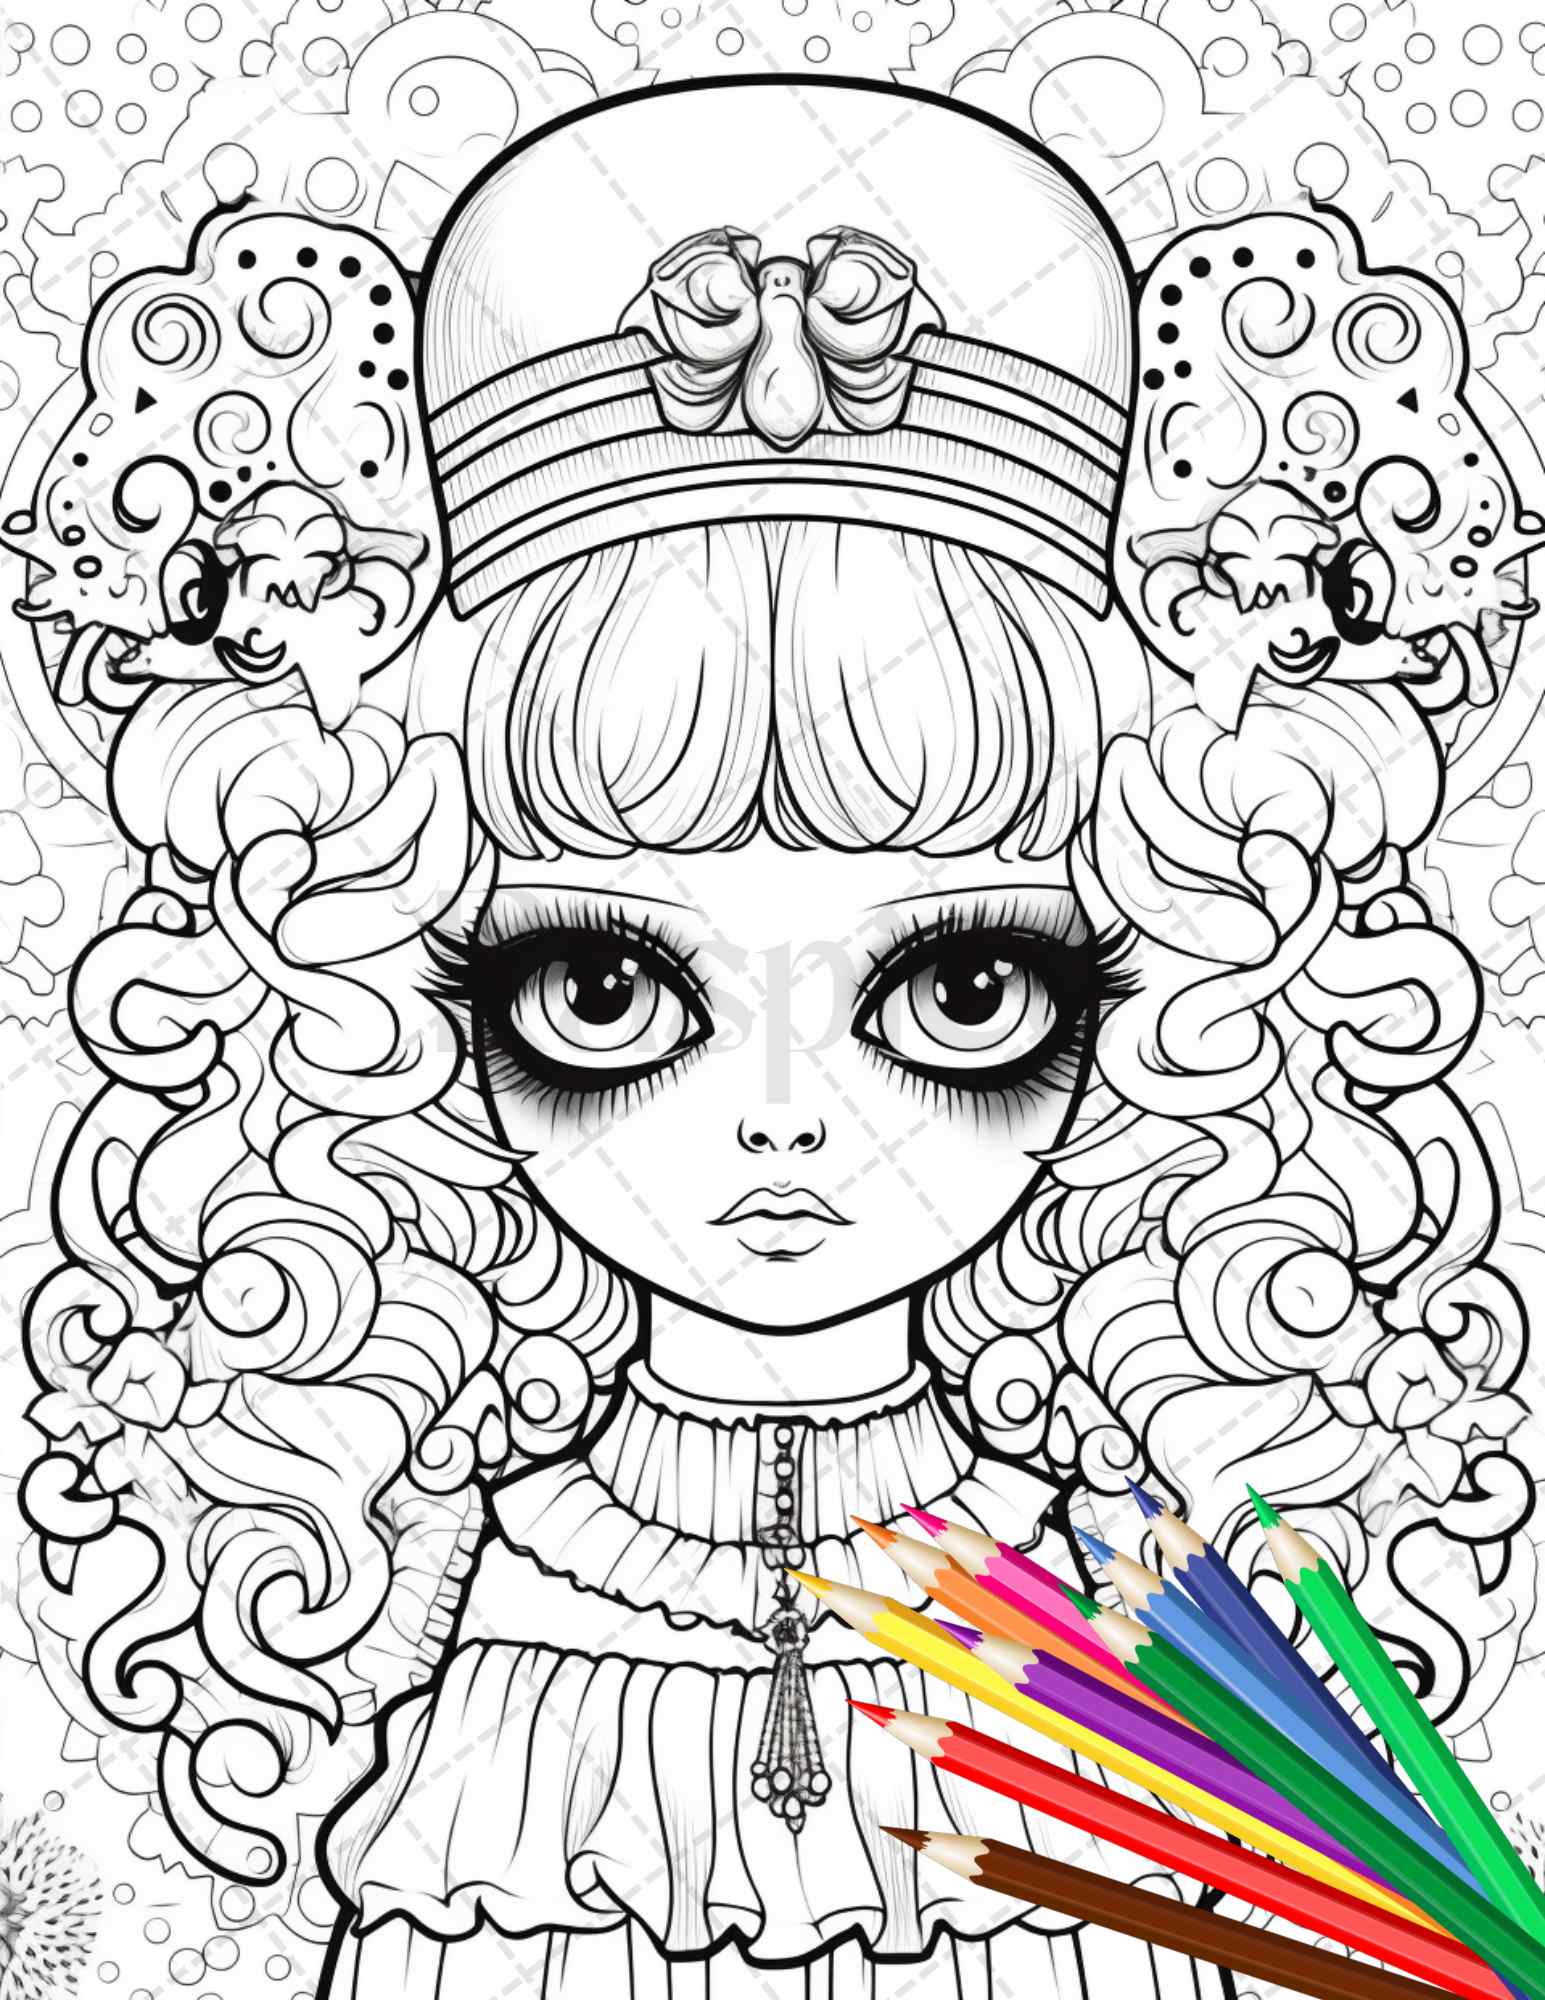 Creepy kawaii pastel goth coloring pages printable for adults gray â coloring